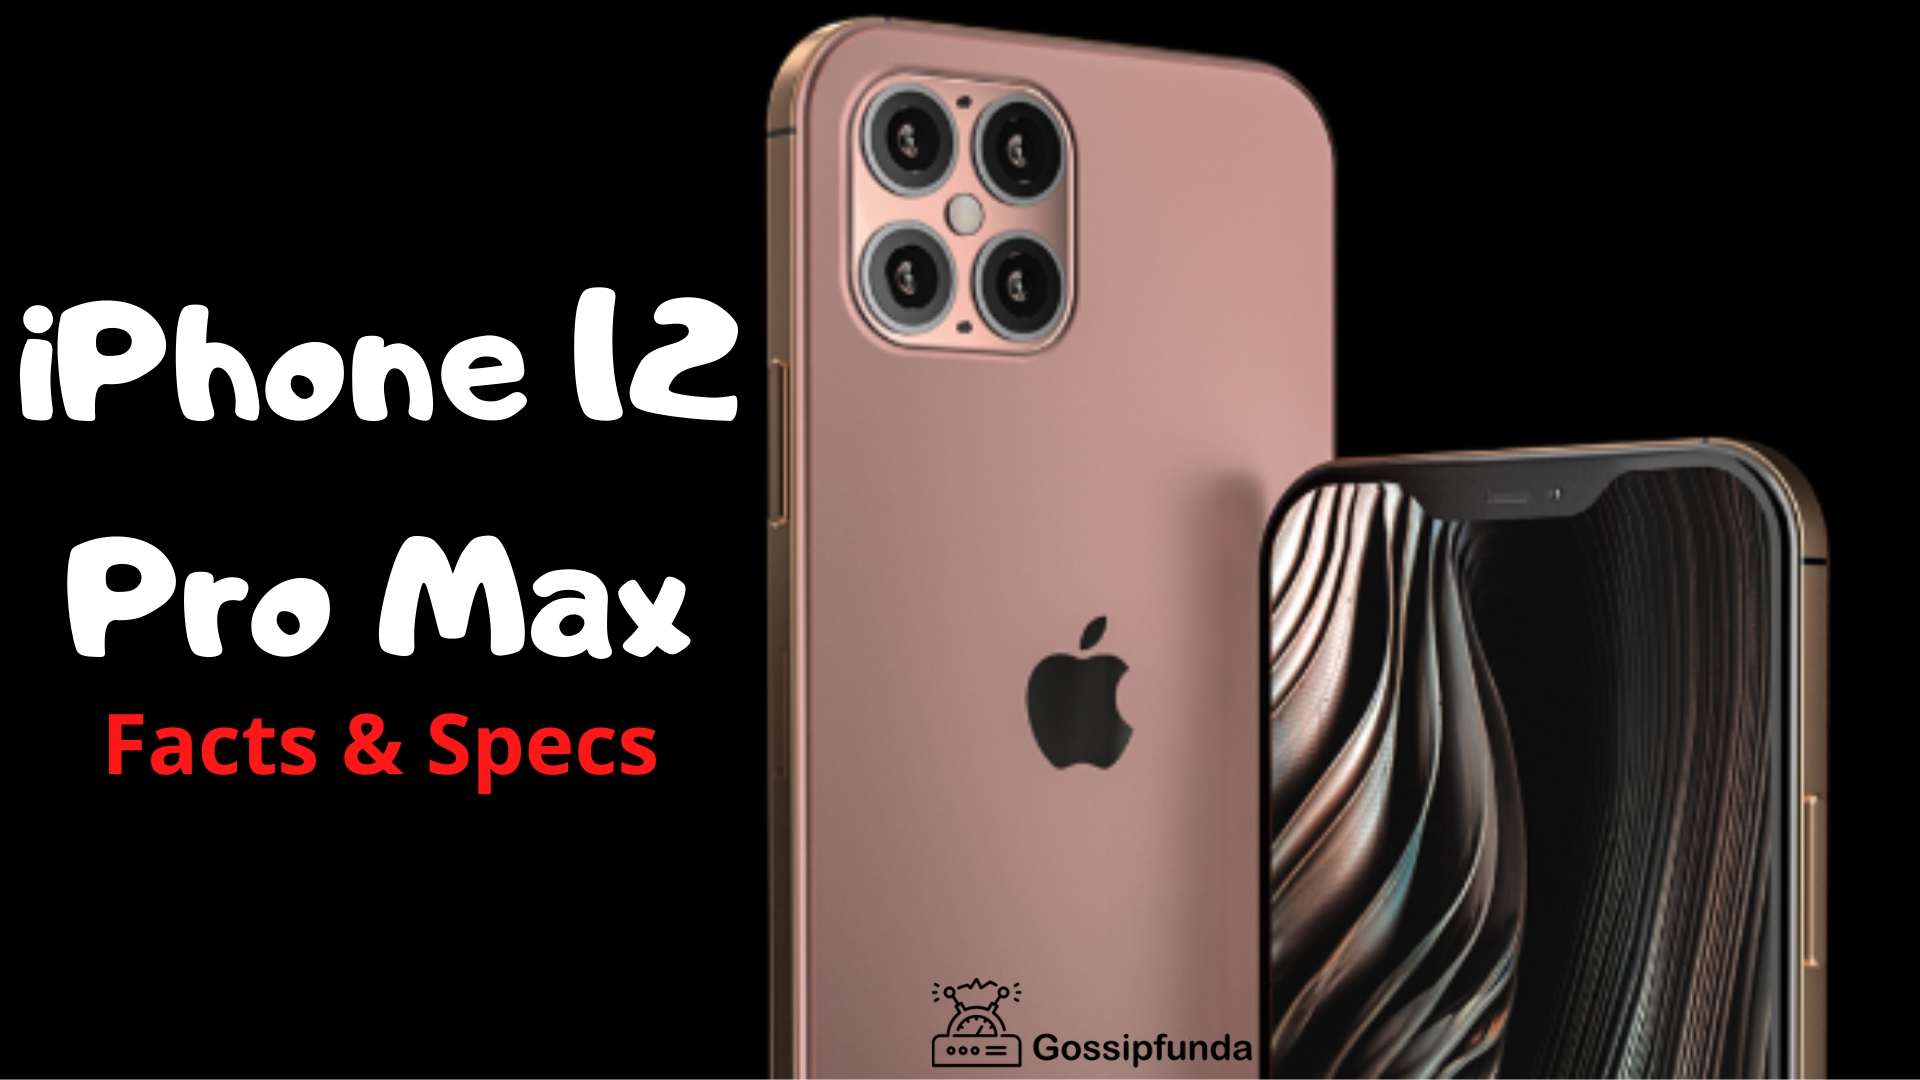 12 pro max iphone 12 colors